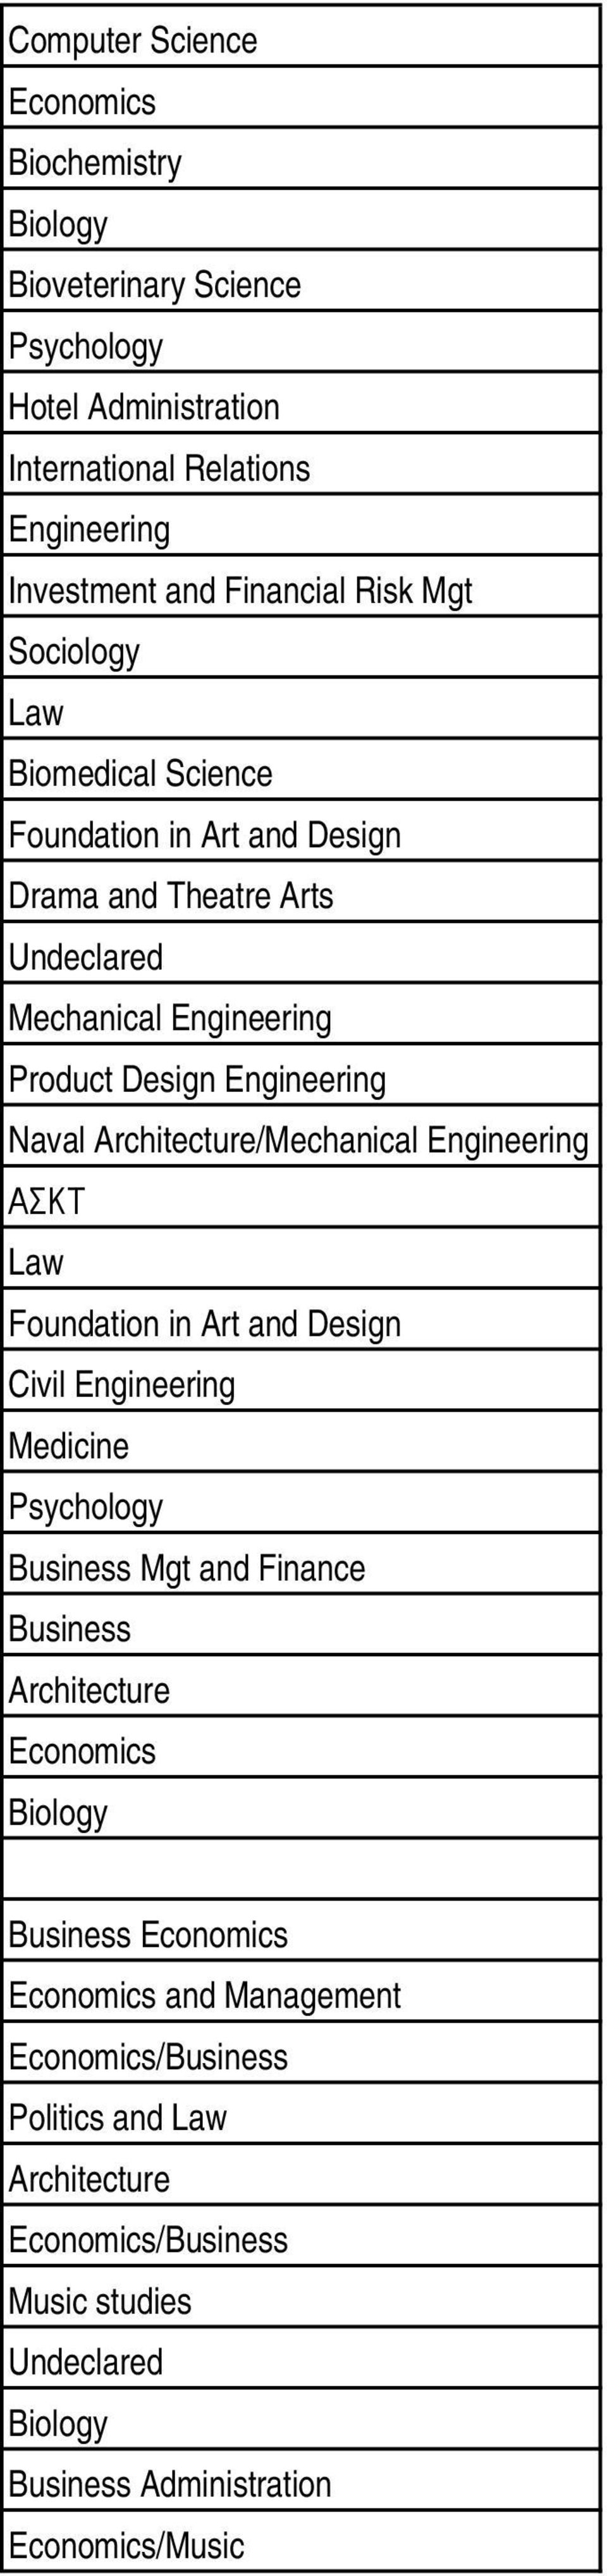 Undeclared Product Design Engineering Naval / ΑΣΚΤ Law Civil Engineering Medicine Business Mgt and Finance